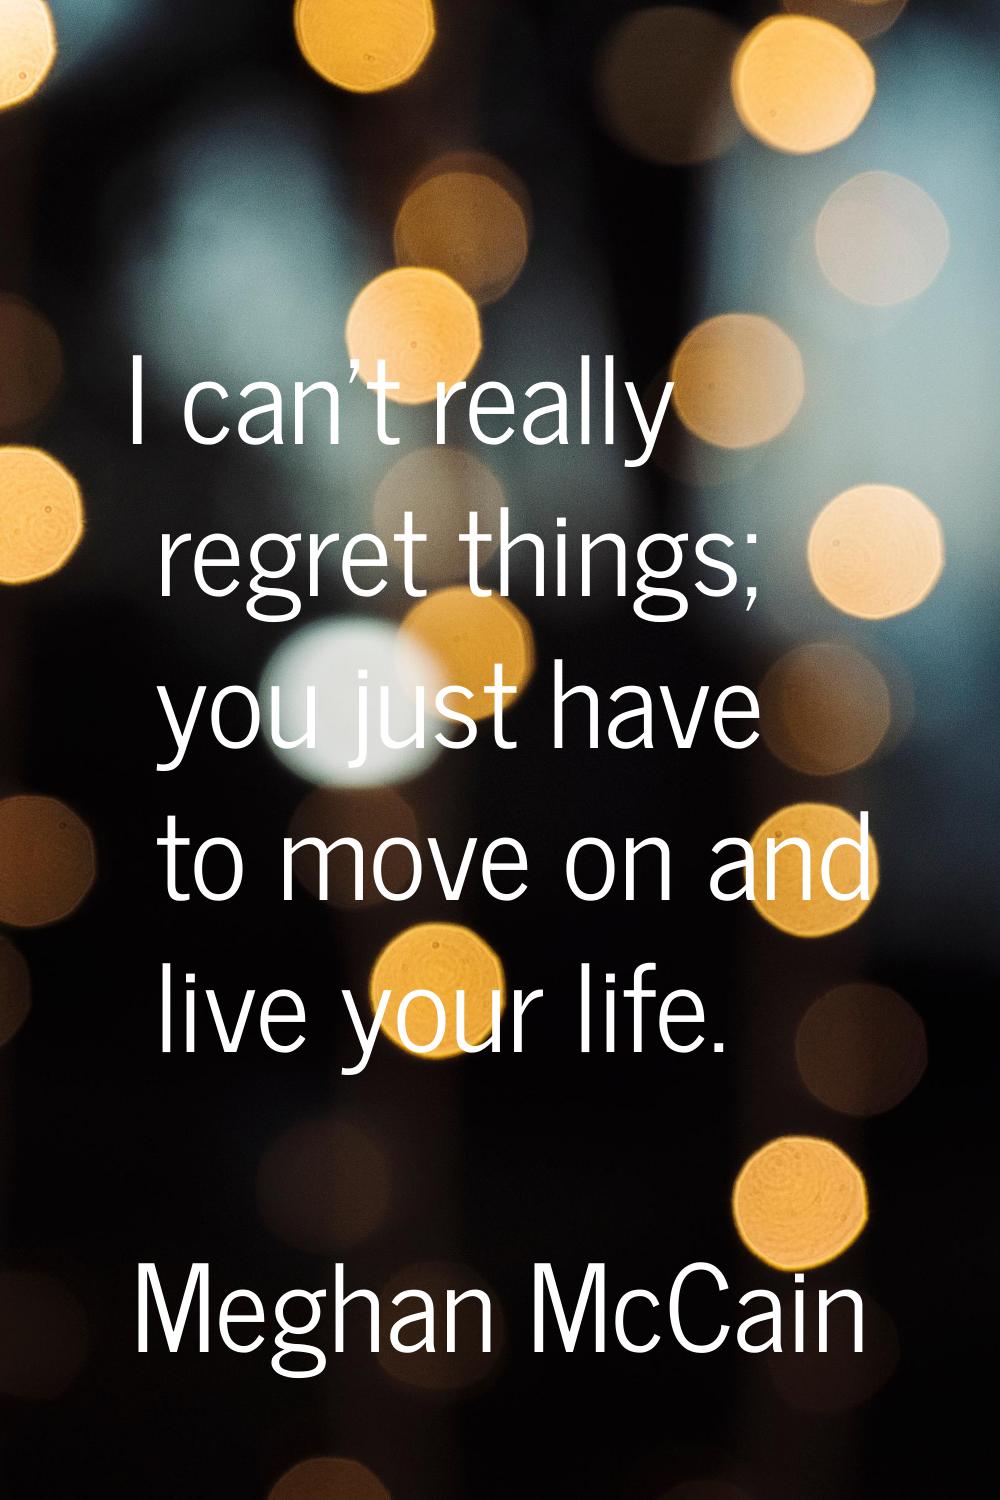 I can't really regret things; you just have to move on and live your life.